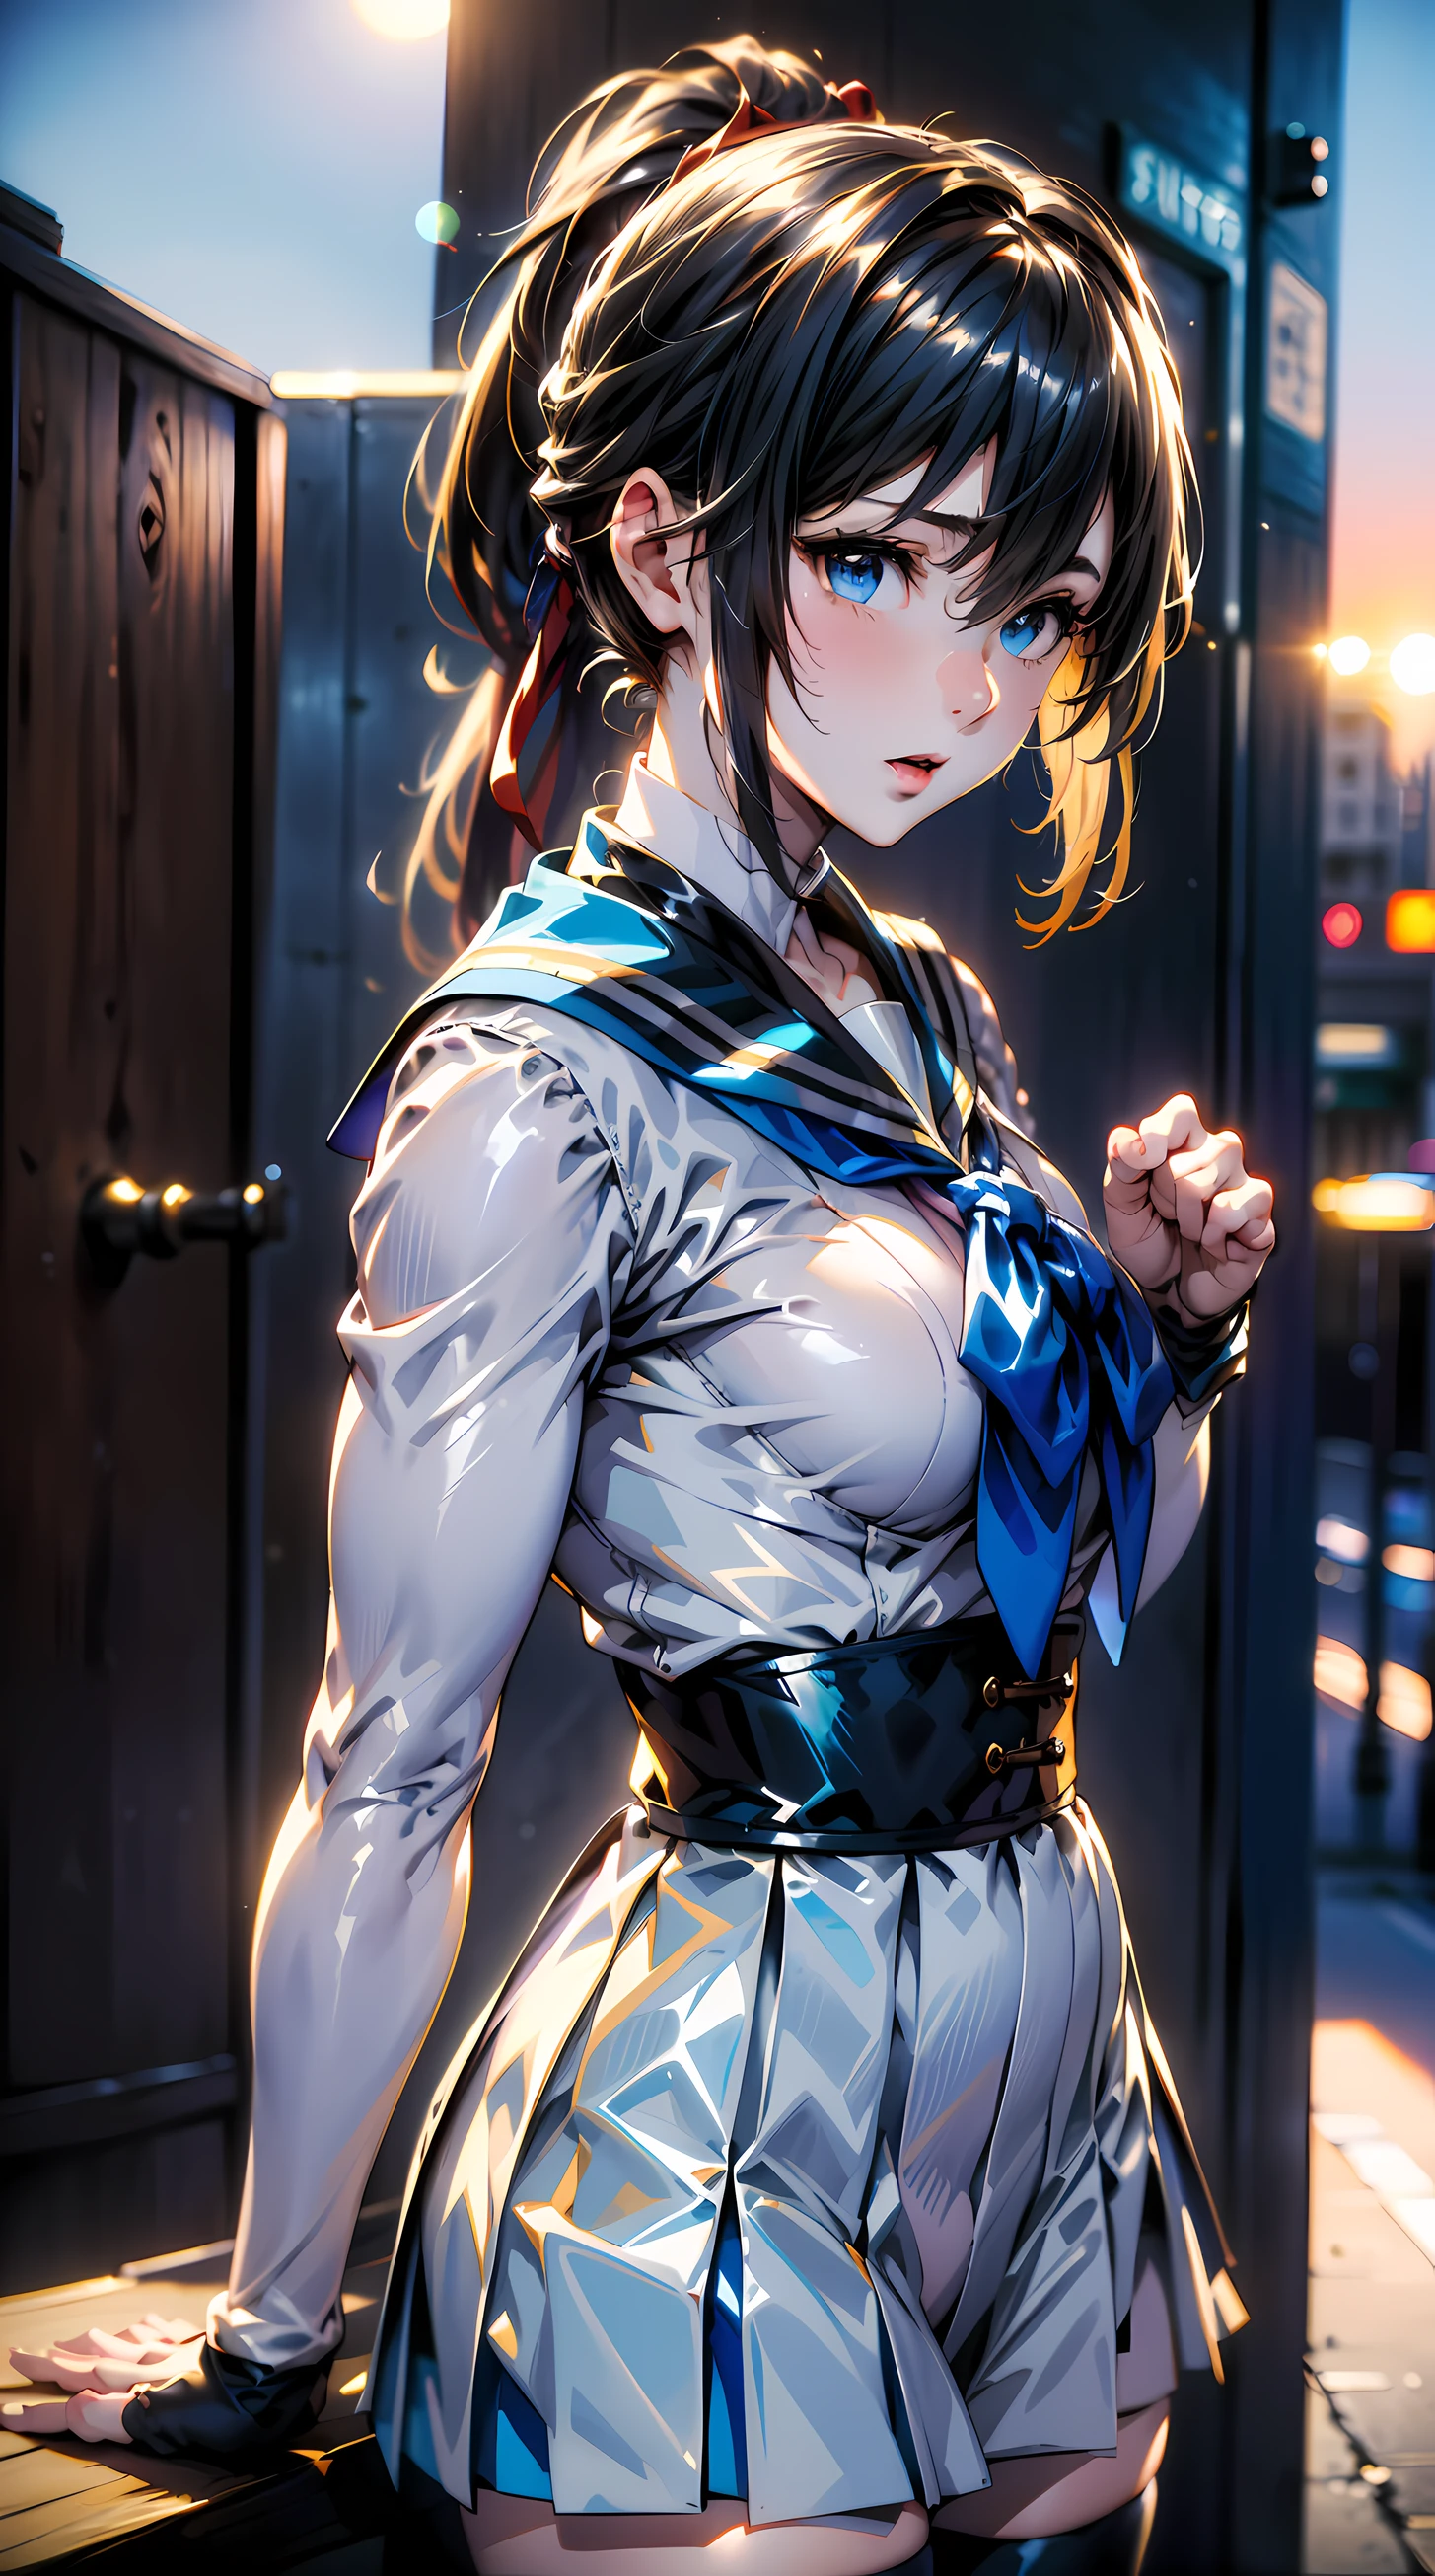 3d animation, (1girl:1.3, solo), (japanese school girl), (upper body:1.3), (at telephone box under Full-Moon:1.2), (random fighting posing:1.3), highly detailed eyes and pupils, realistic skin, ((attractive body, small breast:1.38, thin waist:1.15)), medium-length thin hair, ((bobbles ponytail:1.3), (shiny-black hair:1.3), extremely detailed hair, delicate sexy face, sensual gaze, shiny lips, BREAK, (white leotard:1.3), (magical girl costume:1.2), (blue Sailor collar:1.3), (red ribbon:1.4), (blue pleated skirt:1.3), (micro-skirt:1.3), (no_sleeve:1.2), (long_glove:1.2), (white thighhighs:1.2),(long_boots:1.2), detailed clothes, BREAK, (outdoor:1.2), (blurry background:1.25, simple background, detailed background), (under sunset:1.37), BREAK, ((realistic, super realistic, realism, realistic detail)), perfect anatomy, perfect proportion, hyper sharp image, (serious emotion), ((4fingers and thumb:1.2)), perfect human hands, wind, BREAK, (Masterpiece, best quality, photorealistic, highres, photography, :1.3), ultra-detailed, sharp focus, professional photo, commercial photo, shadows, contrast, clear blue sky, constellations, peaceful, serene, quiet, tranquil, remote, secluded, adventurous, exploration, escape, independence, survival, resourcefulness, challenge, perseverance, stamina, endurance, observation, intuition, adaptability, creativity, imagination, artistry, inspiration, beauty, awe, wonder, gratitude, appreciation, relaxation, enjoyment, rejuvenation, mindfulness, awareness, connection, harmony, balance, texture, detail, realism, depth, perspective, composition, color, light, shadow, reflection, refraction, tone, contrast, foreground, middle ground, background, naturalistic, figurative, representational, impressionistic, expressionistic, abstract, innovative, experimental, unique